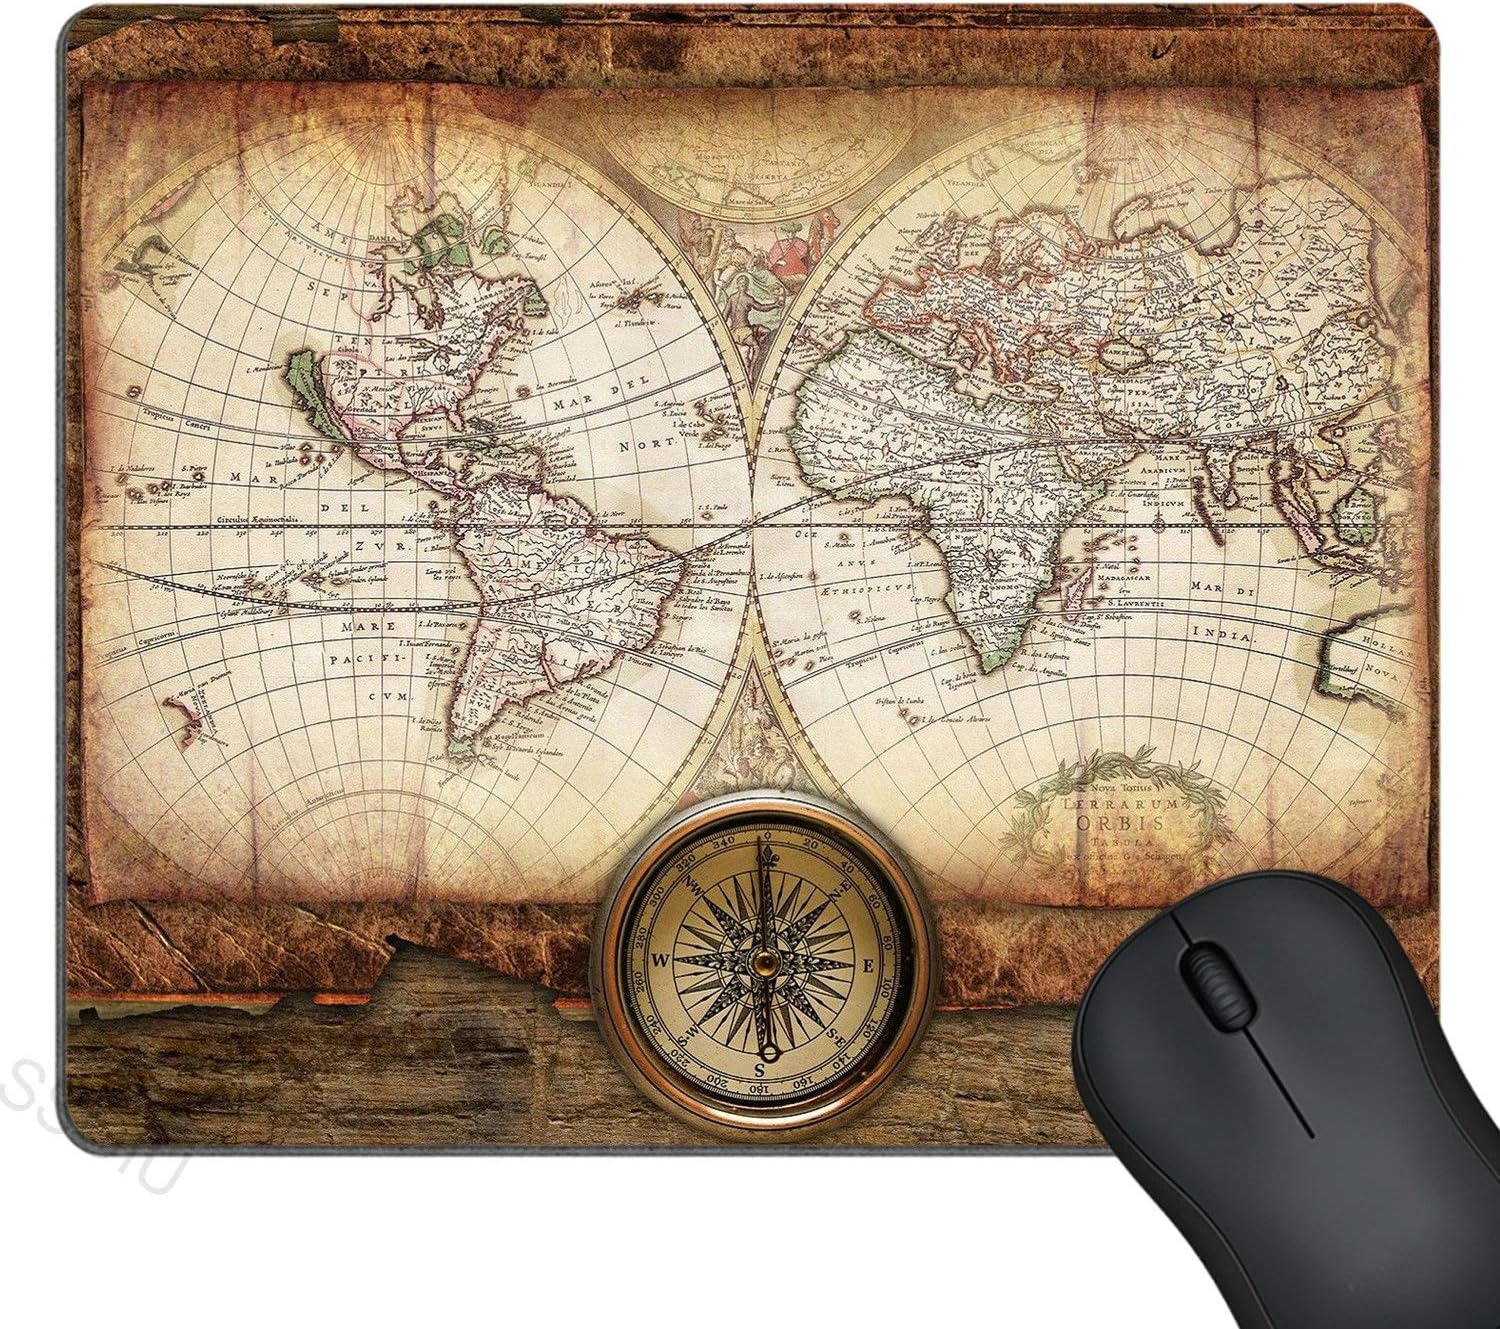 Gaming Mouse Pad Custom Design, Vintage World Map Gold Compass on the Old Wood